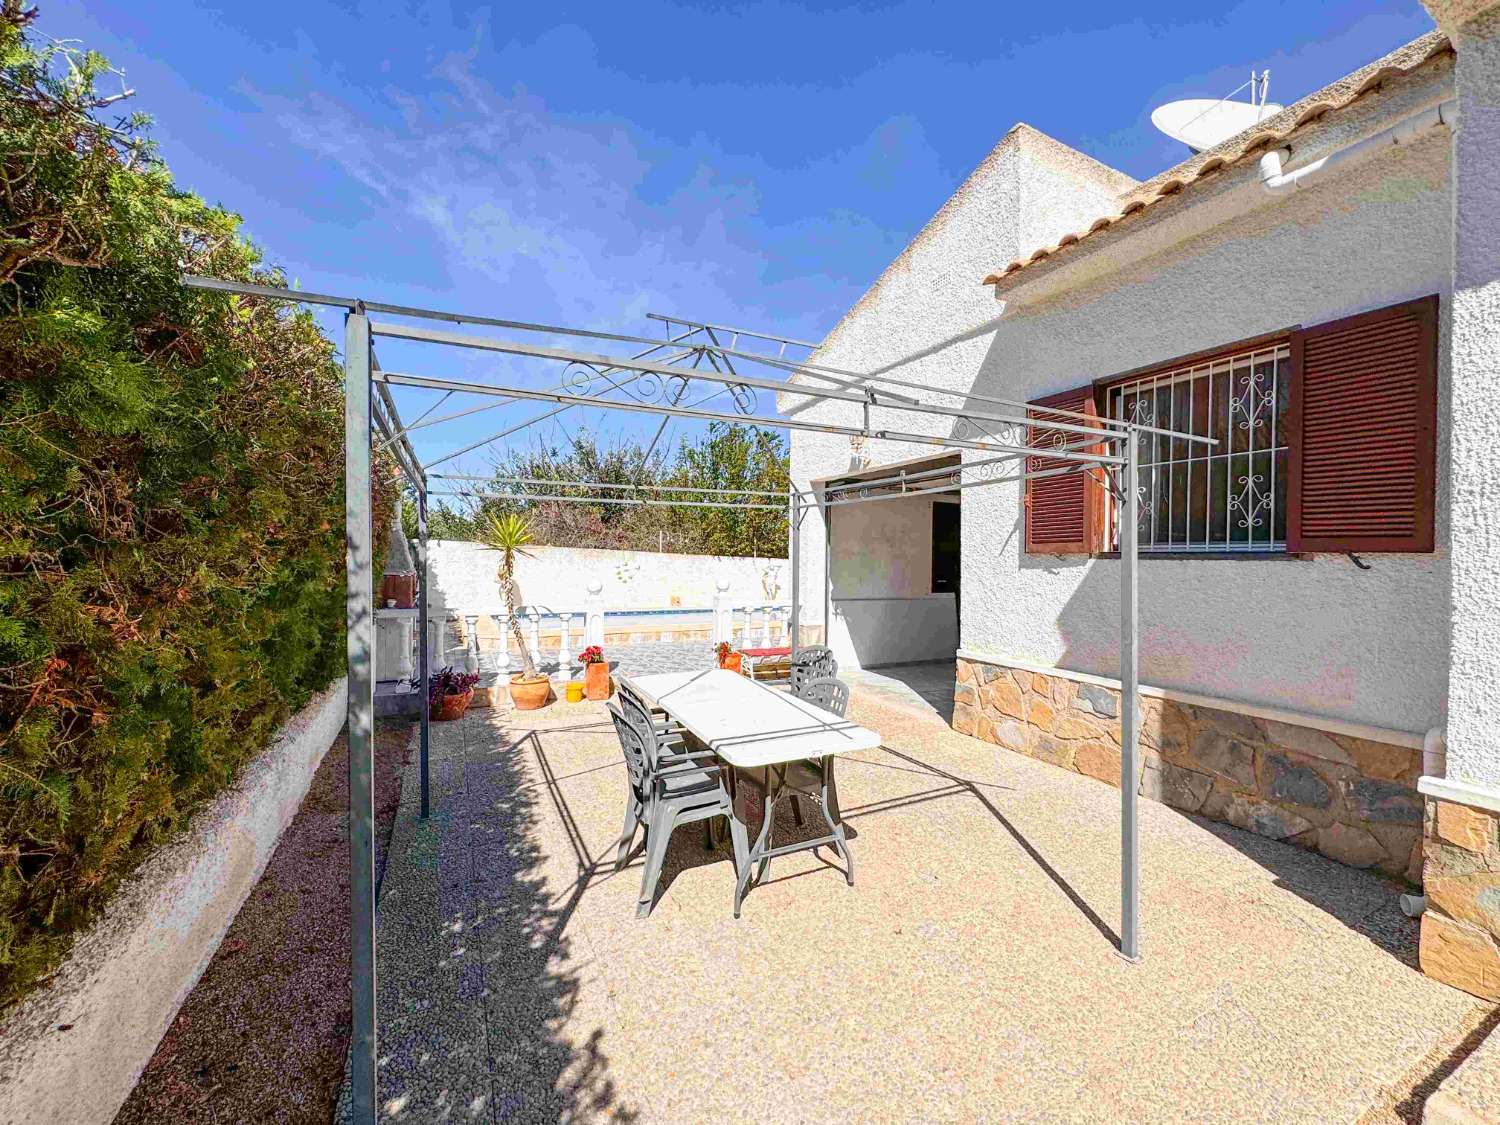 SEMI-DETACHED VILLA WITH PRIVATE POOL AND GARAGE IN URB. THE BALCONIES